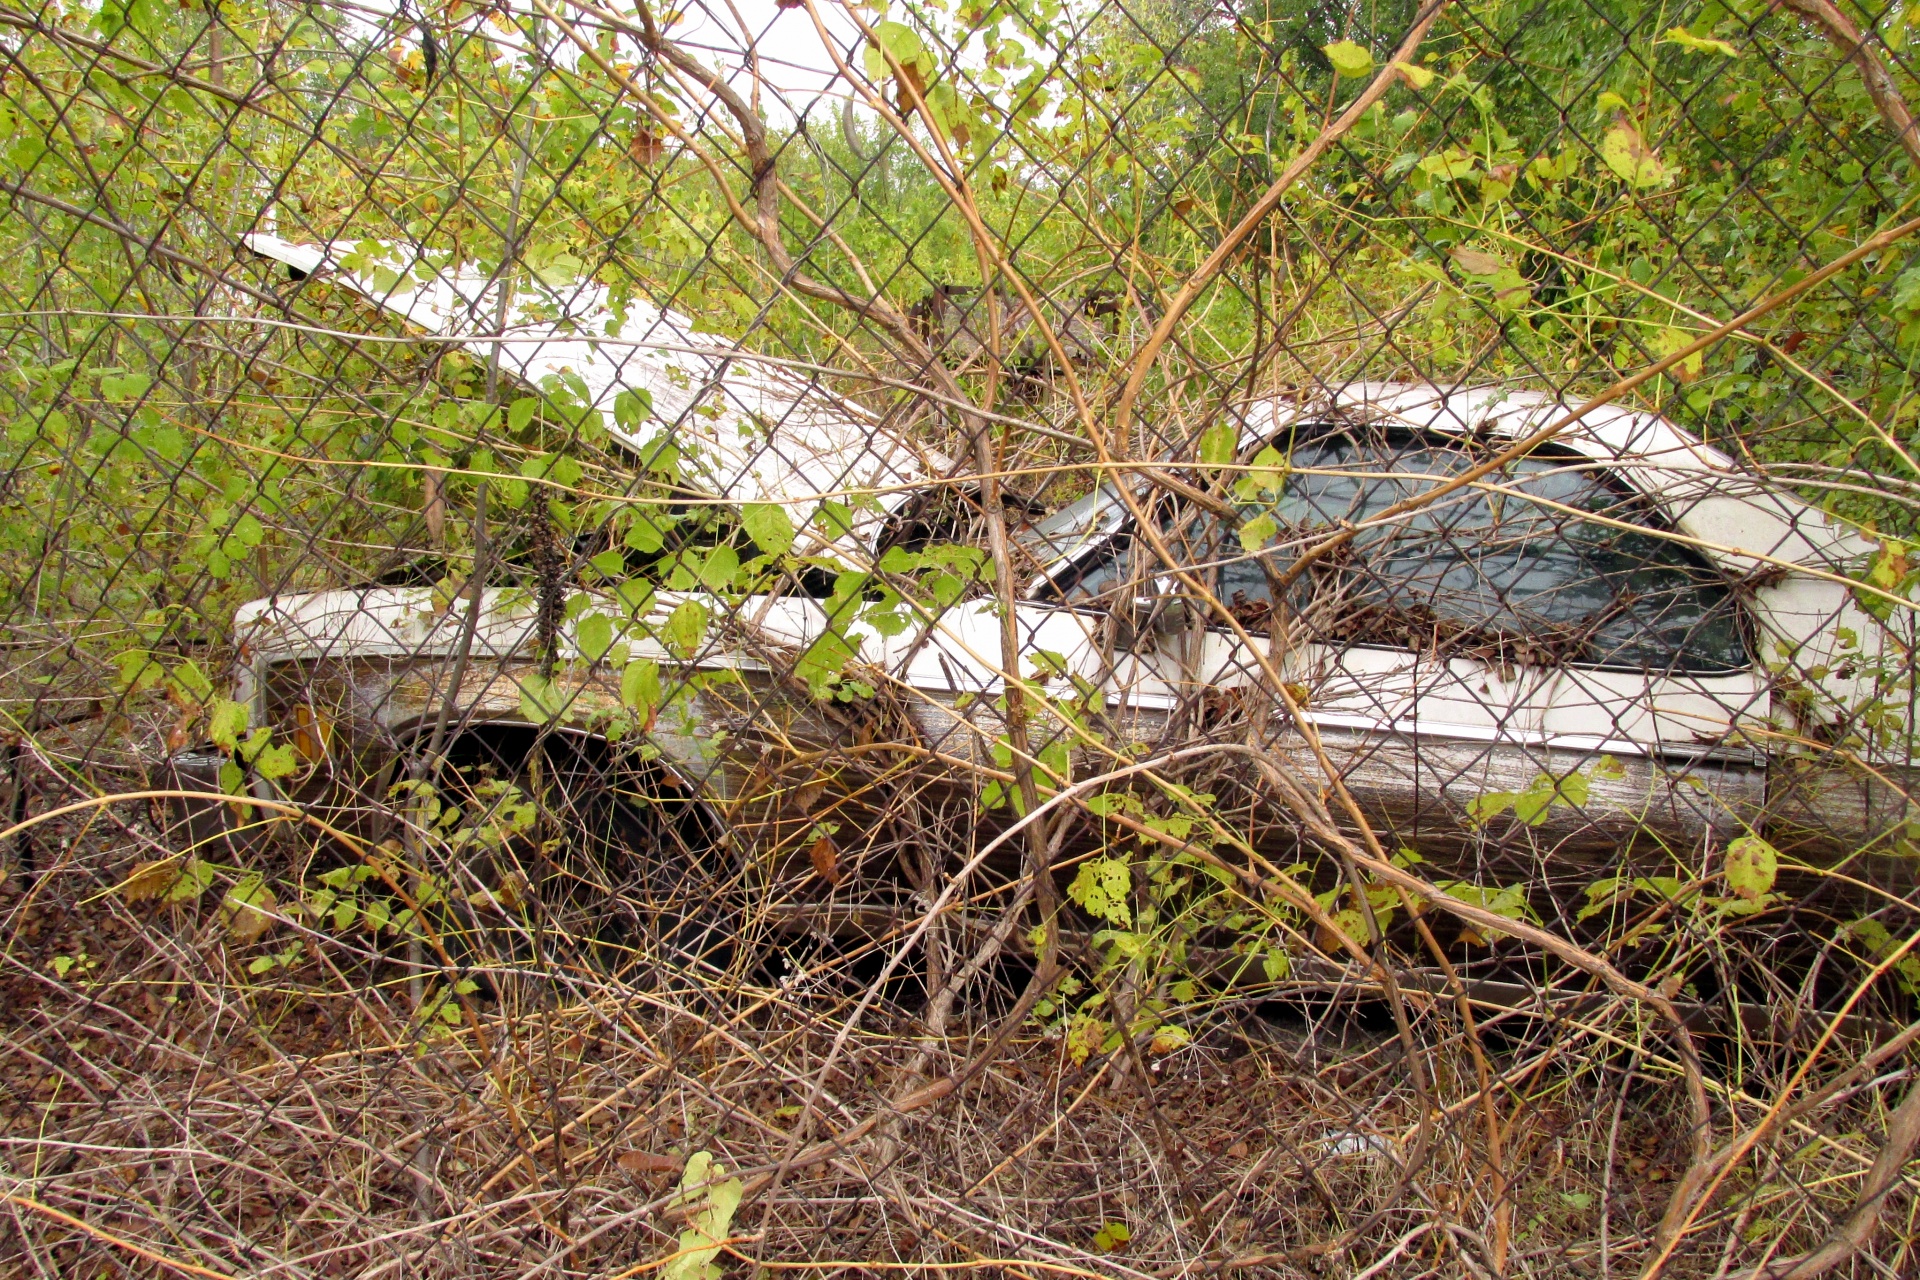 Old Abandoned Car In Weeds